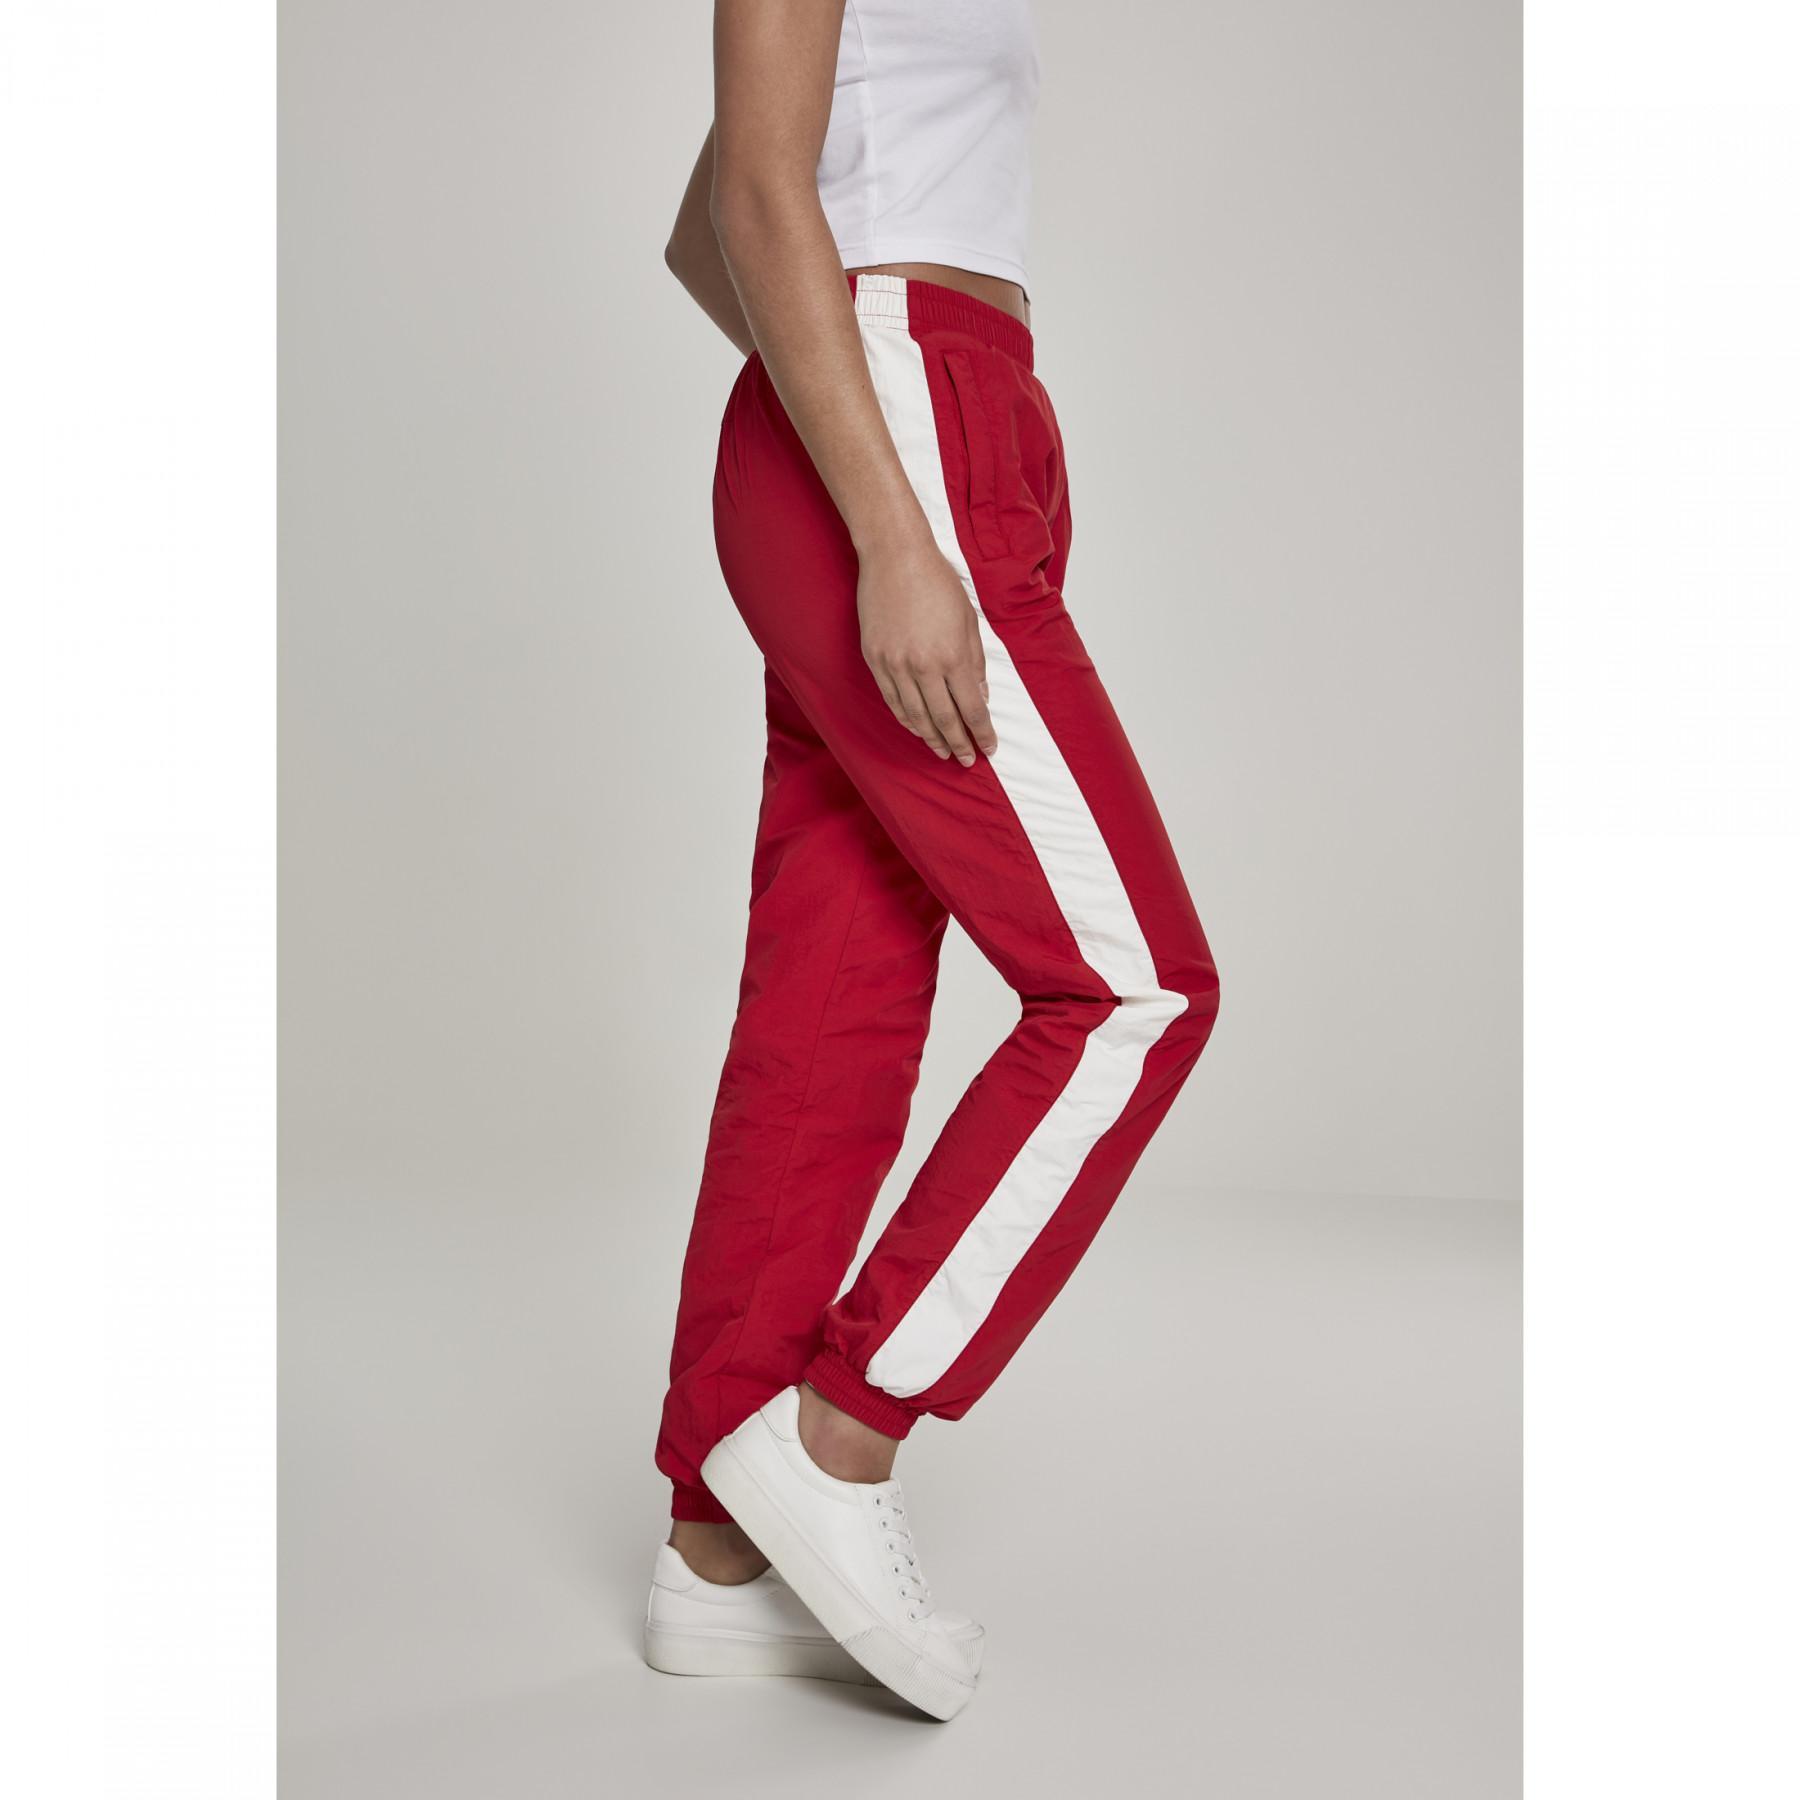 Trousers woman Urban Classic striped crinkle